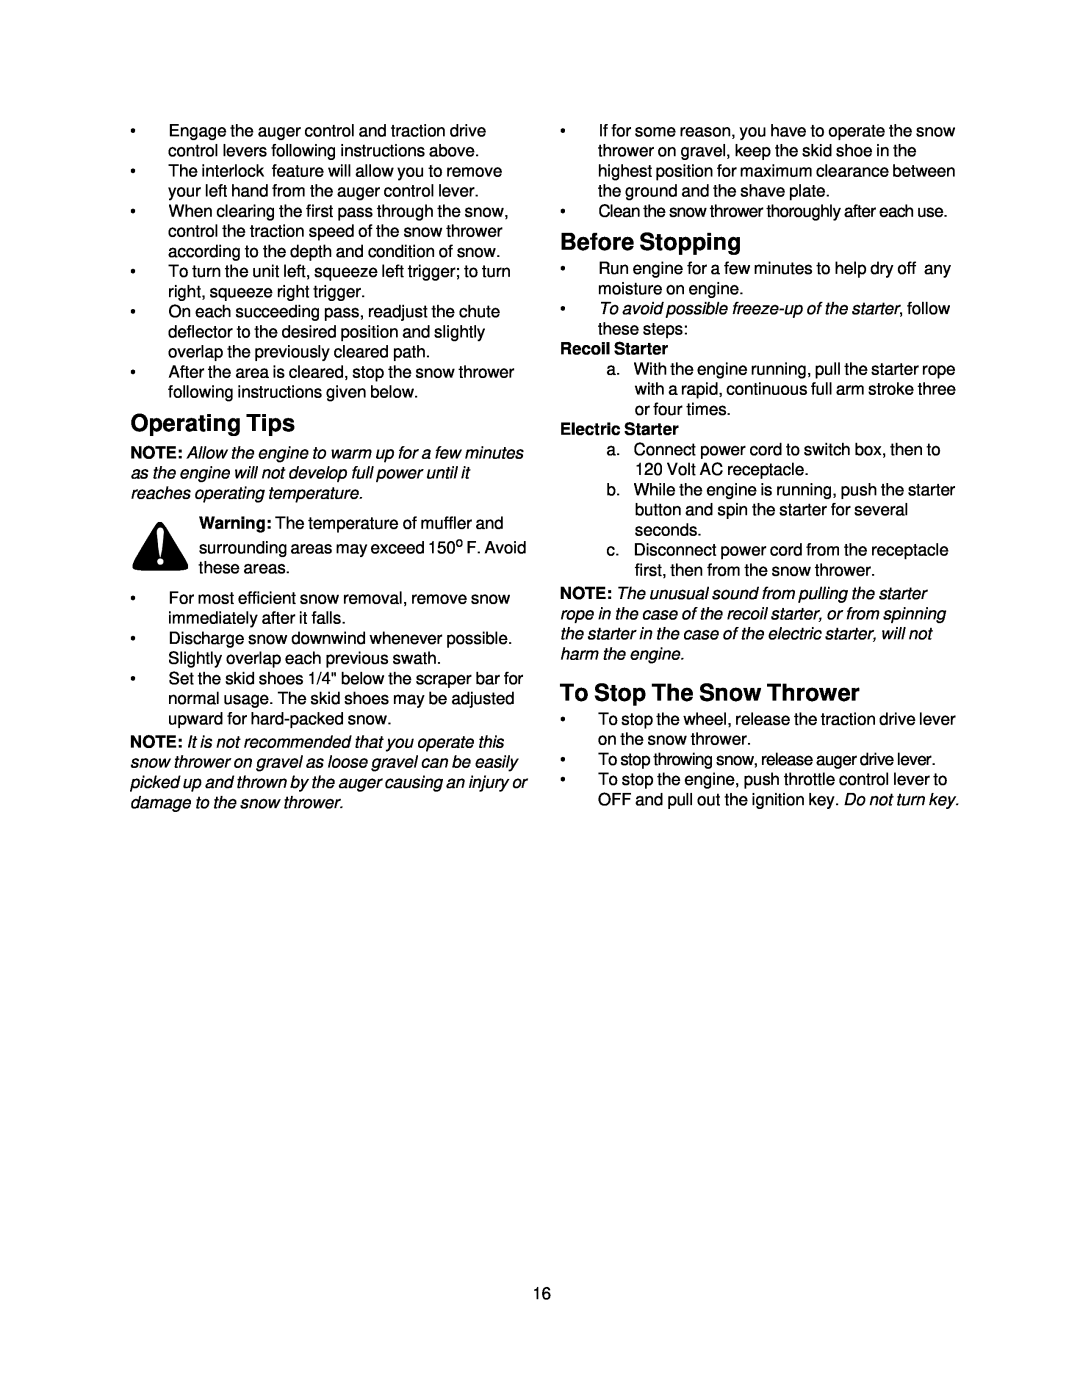 Sears 247.88852 owner manual Operating Tips, Before Stopping, To Stop The Snow Thrower, Recoil Starter, Electric Starter 